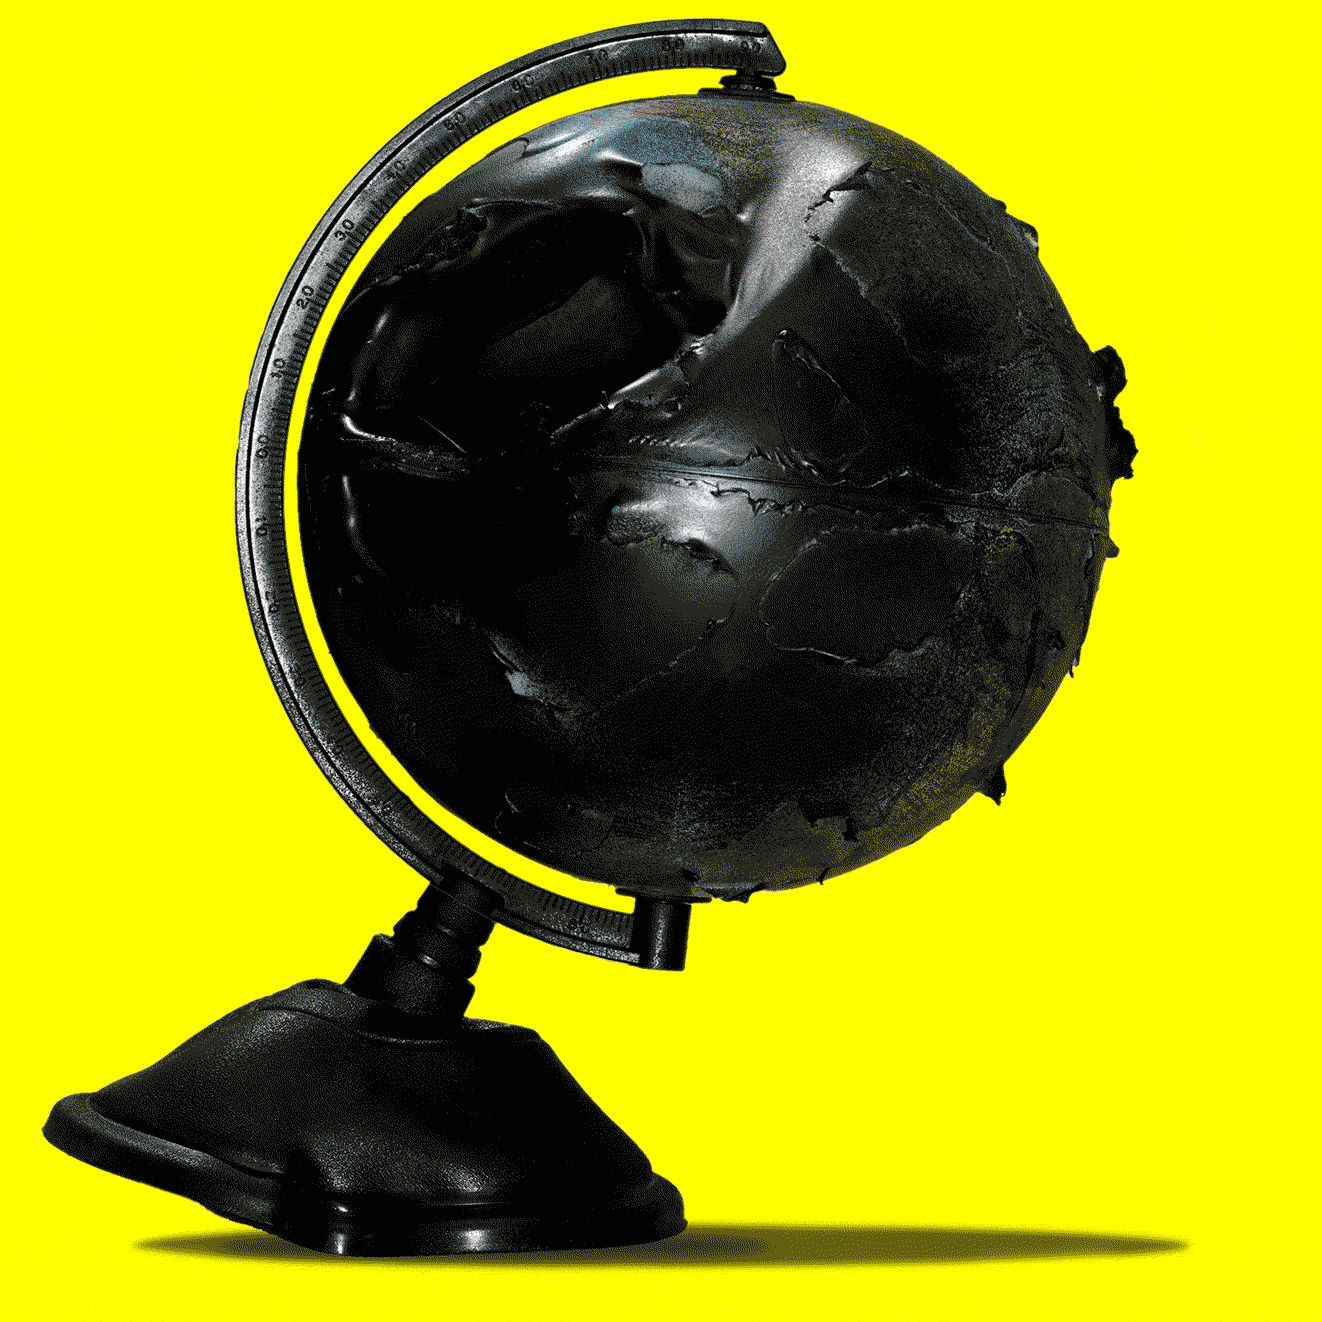 Spinning burnt black globe, melted and tilted right. Globe has a shadow and is over a yellow background.